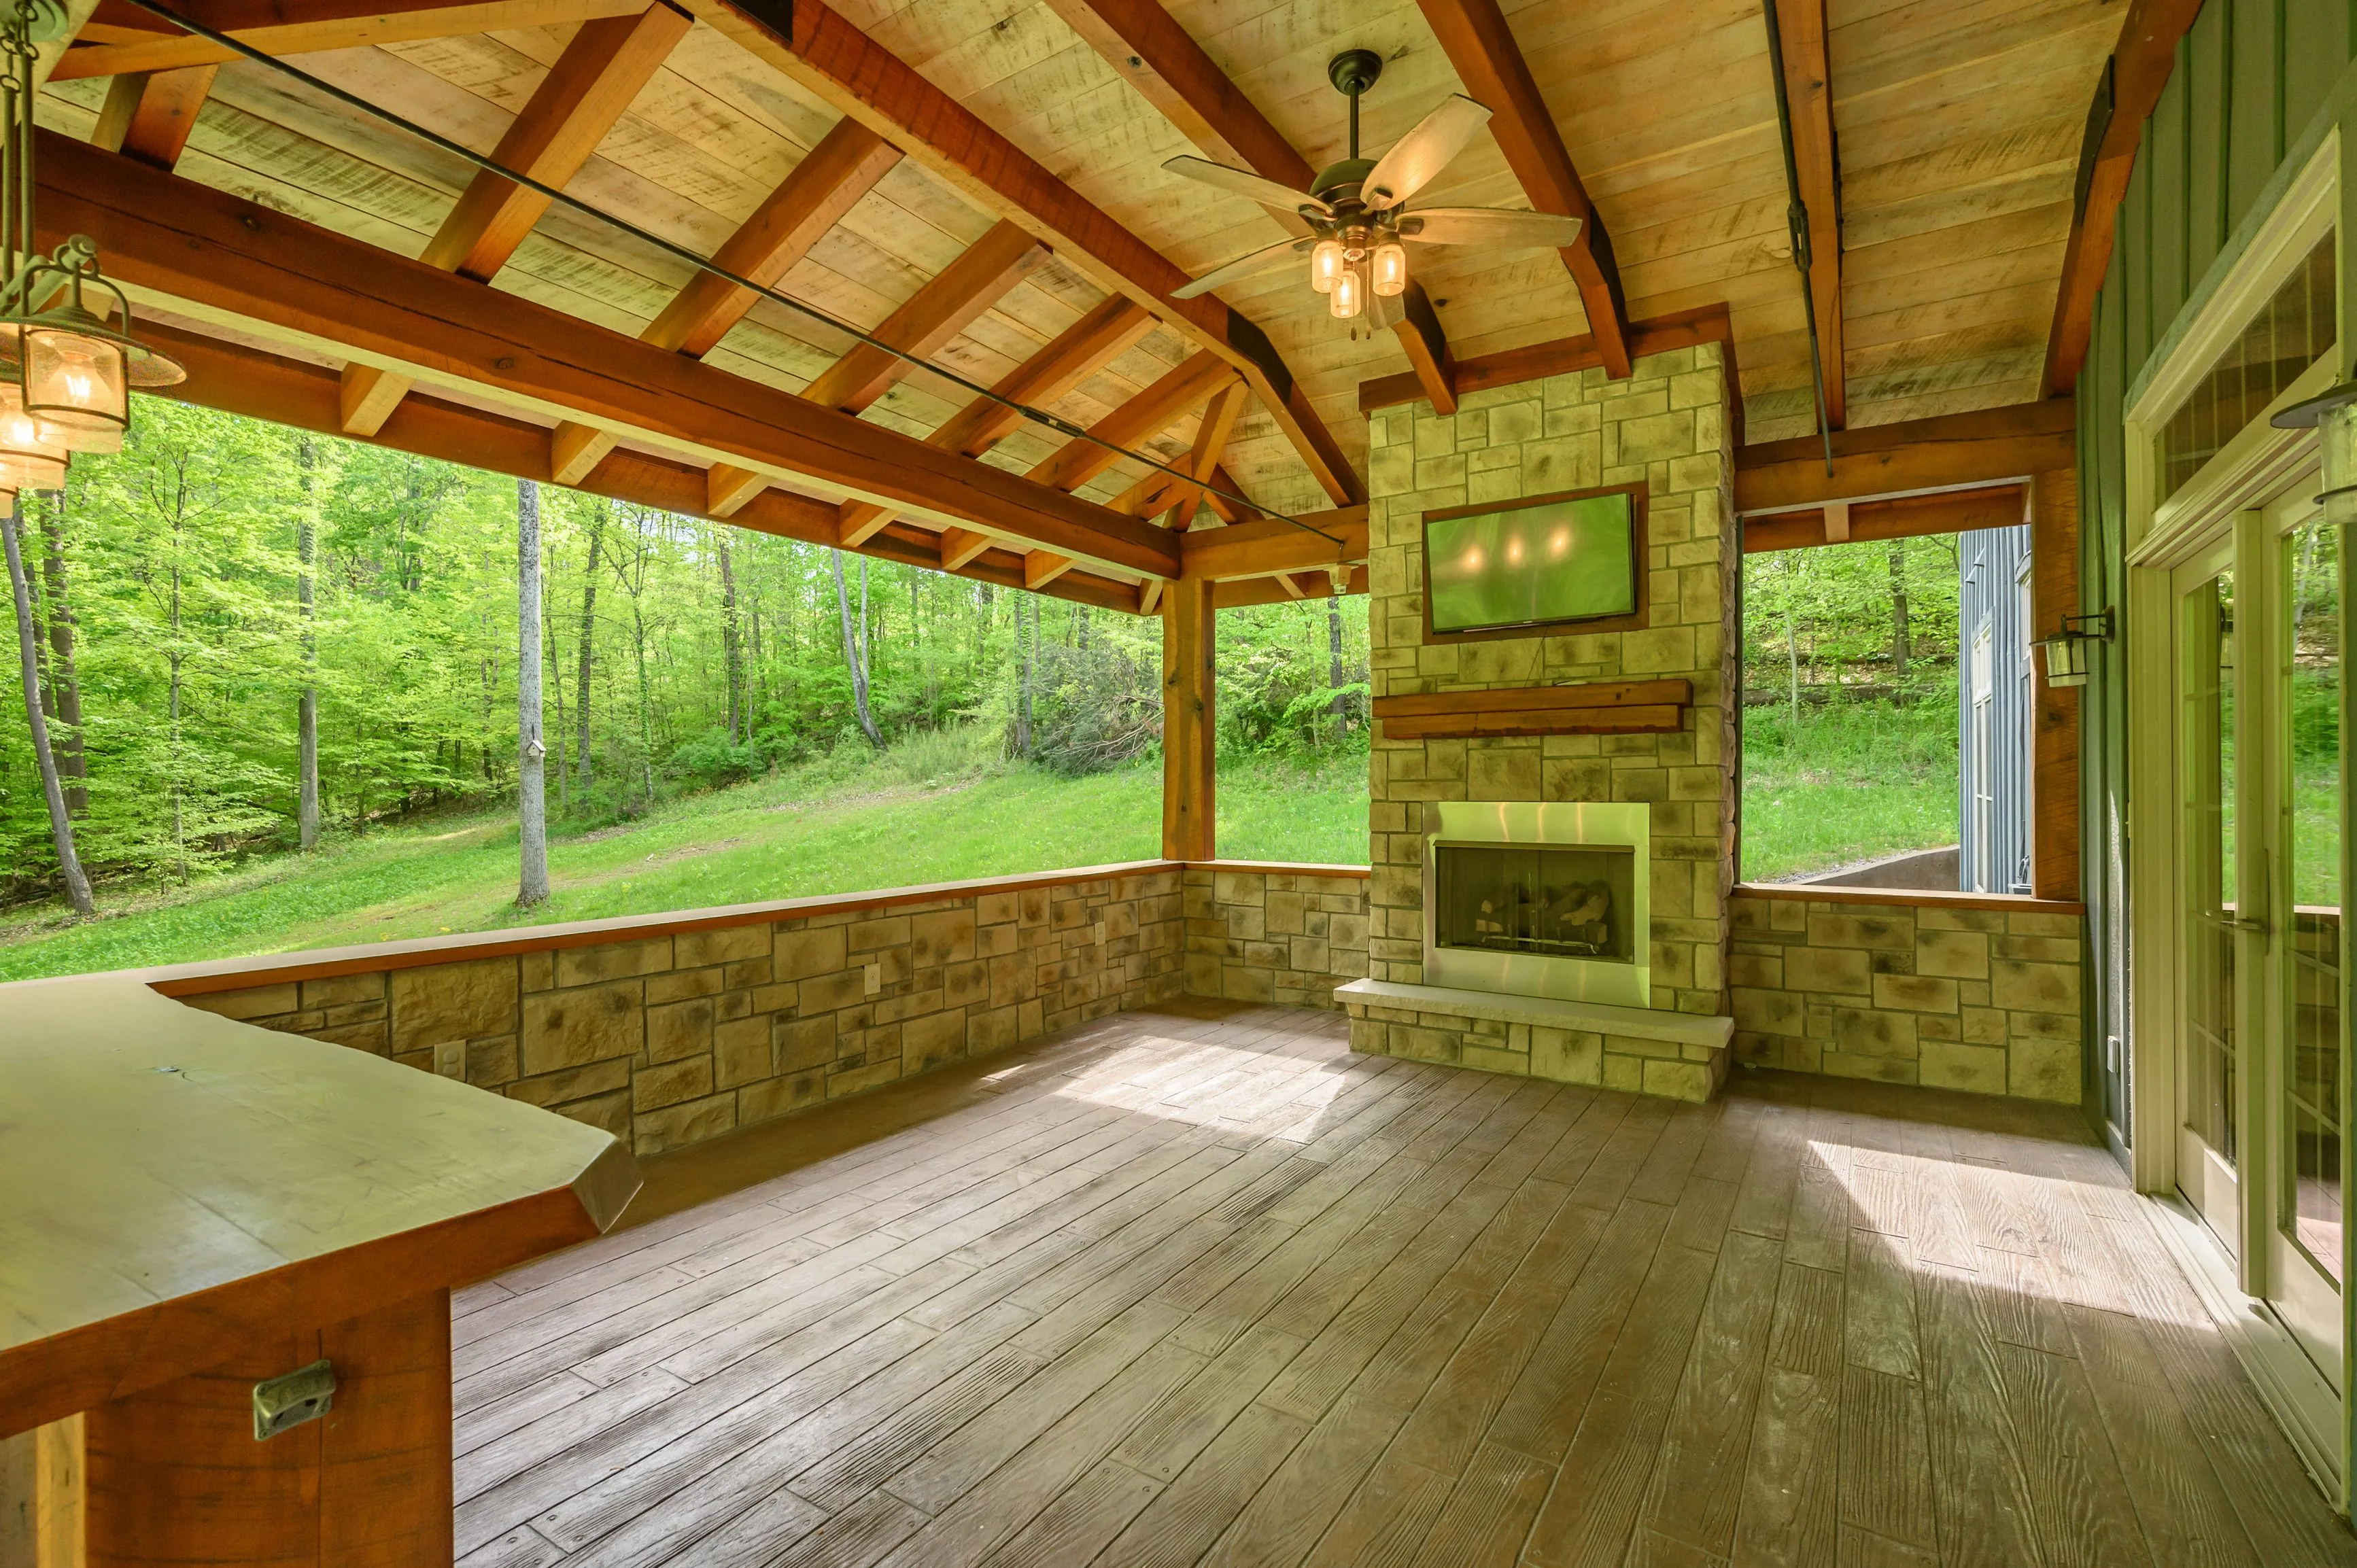 An empty sunroom with wood flooring, stone fireplace, and large windows overlooking a lush green forest.